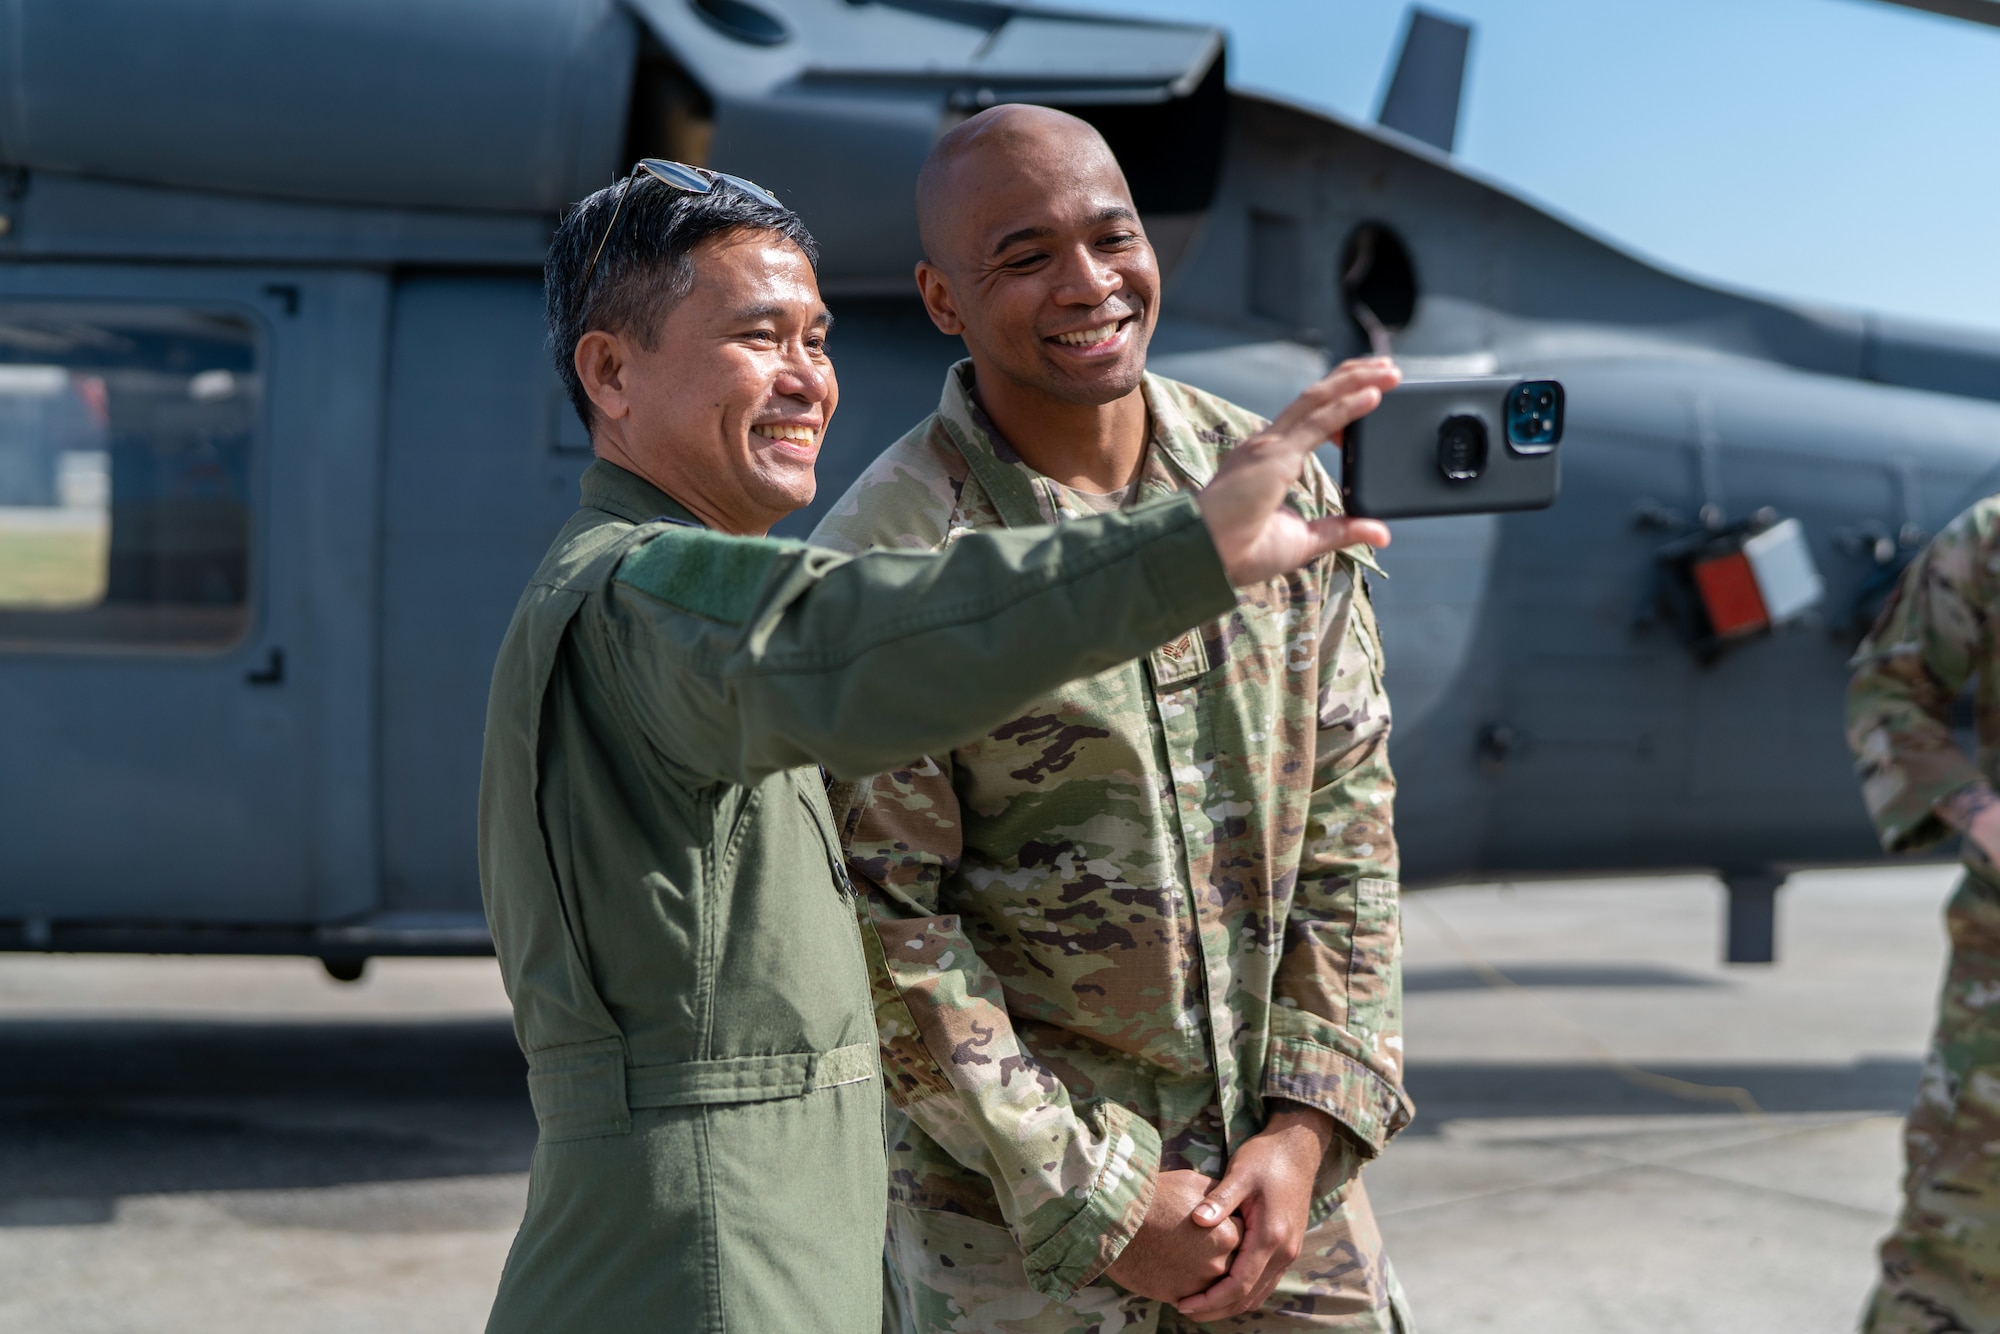 A Philippine Air Force member poses for a photo with an Airman.